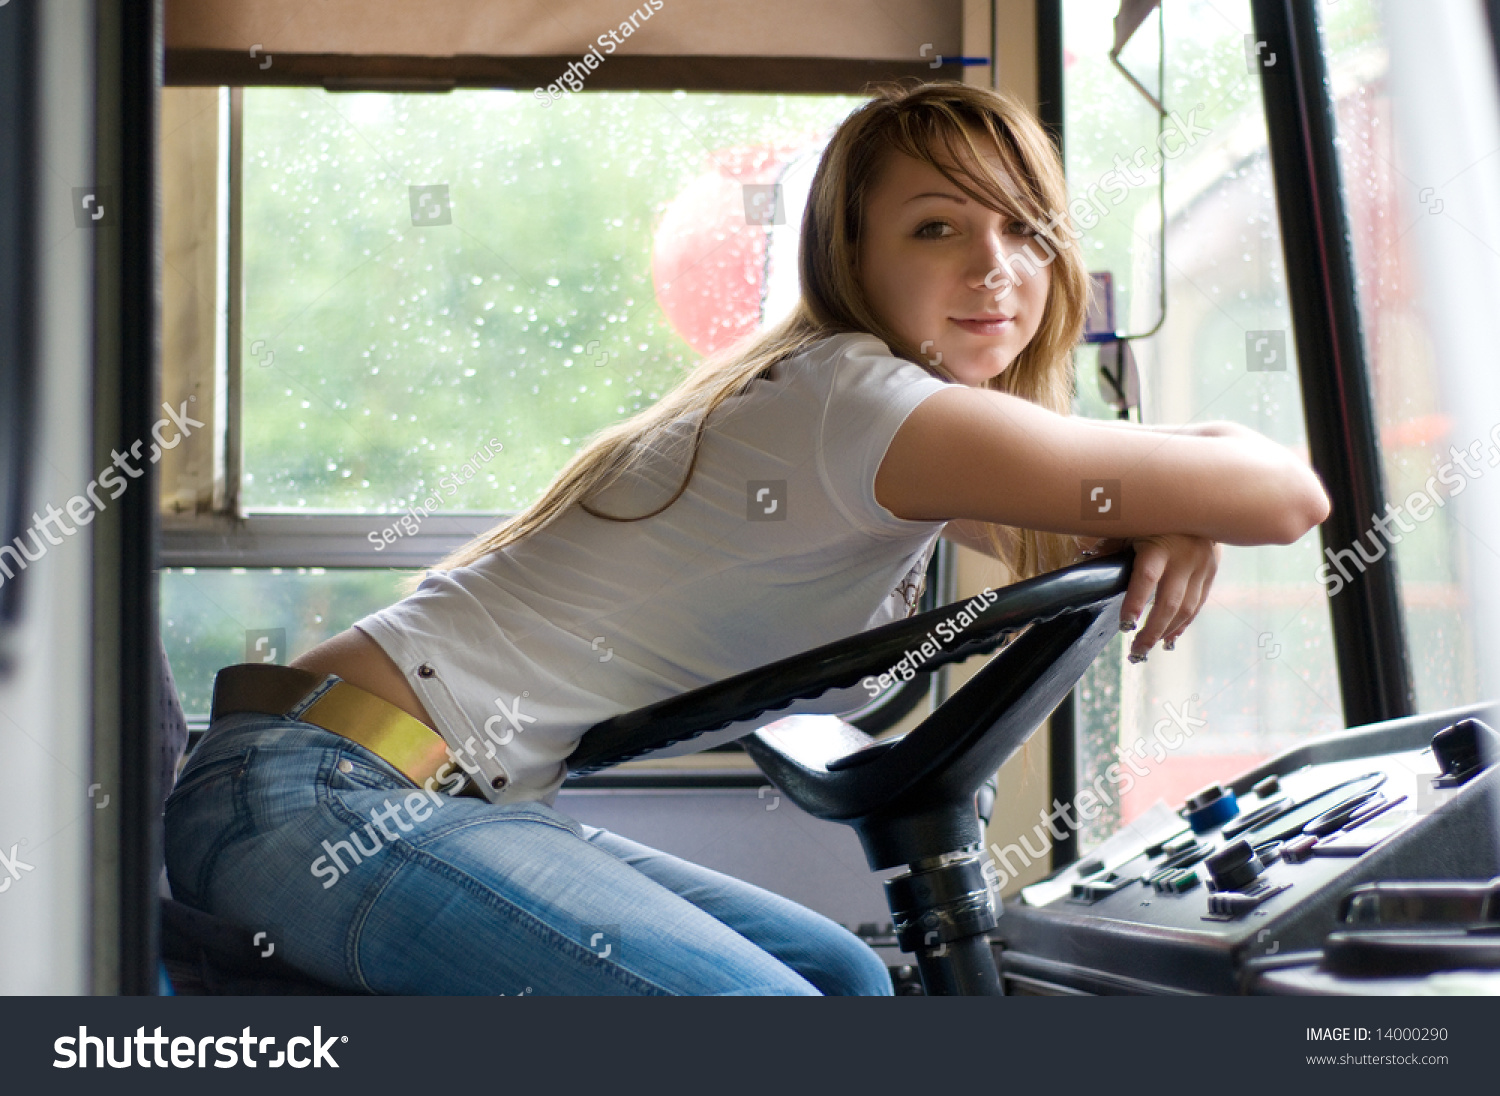 Girl squirts bus